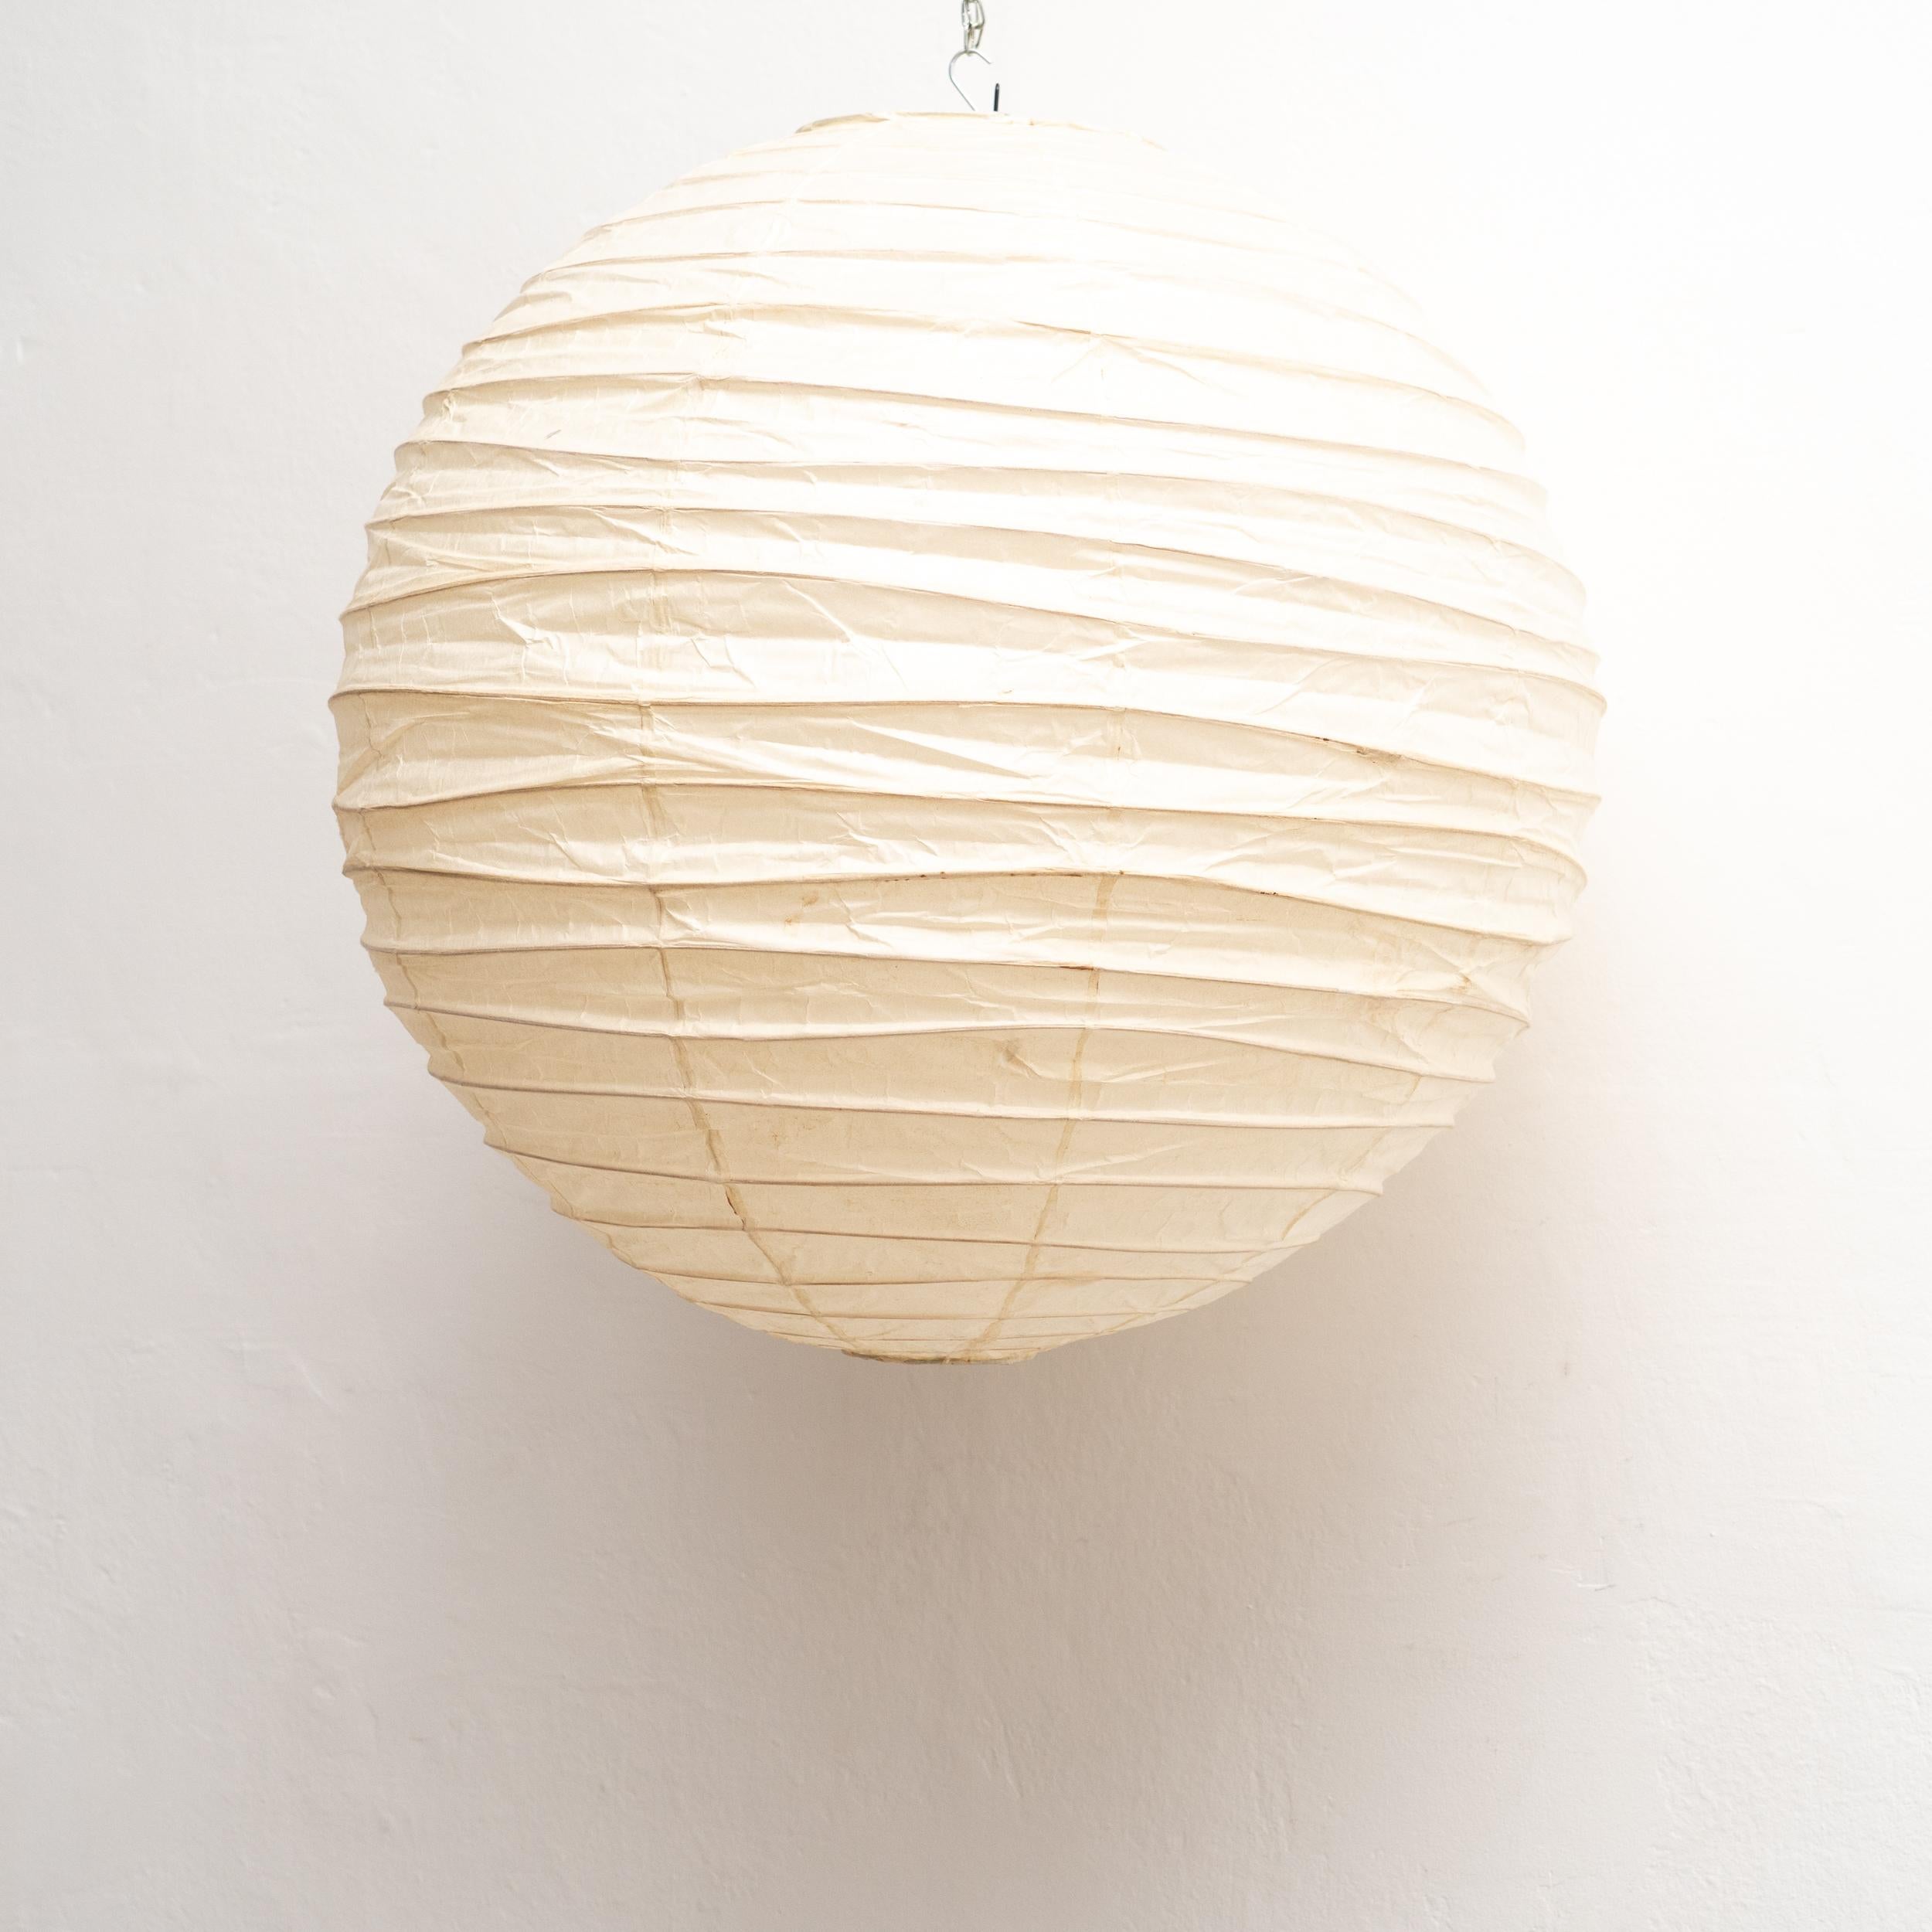 Discover the timeless allure of the Isamu Noguchi Akari Lamp, model 75D, a pendant lamp designed around 1950 and manufactured by Ozeki & Co. Ltd. in Japan. This mid-century modern masterpiece features a bamboo ribbing structure covered by washi